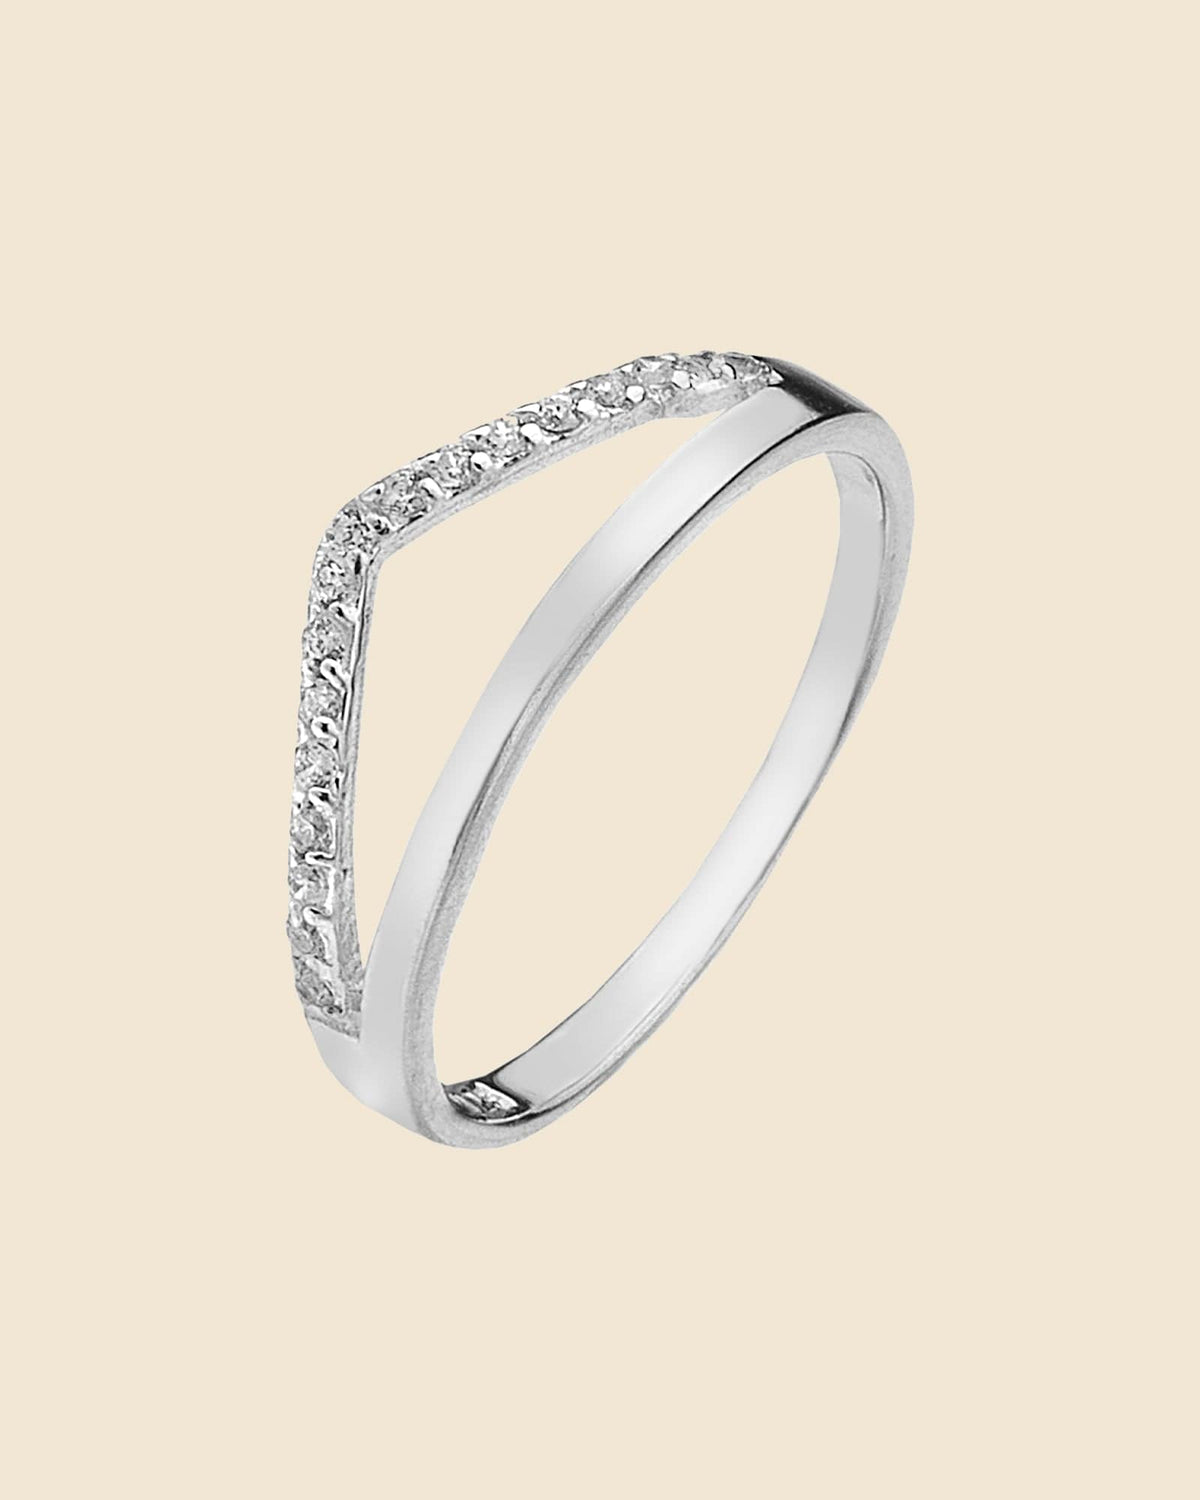 Sterling Silver and Cubic Zirconia Wishbone Band Ring.